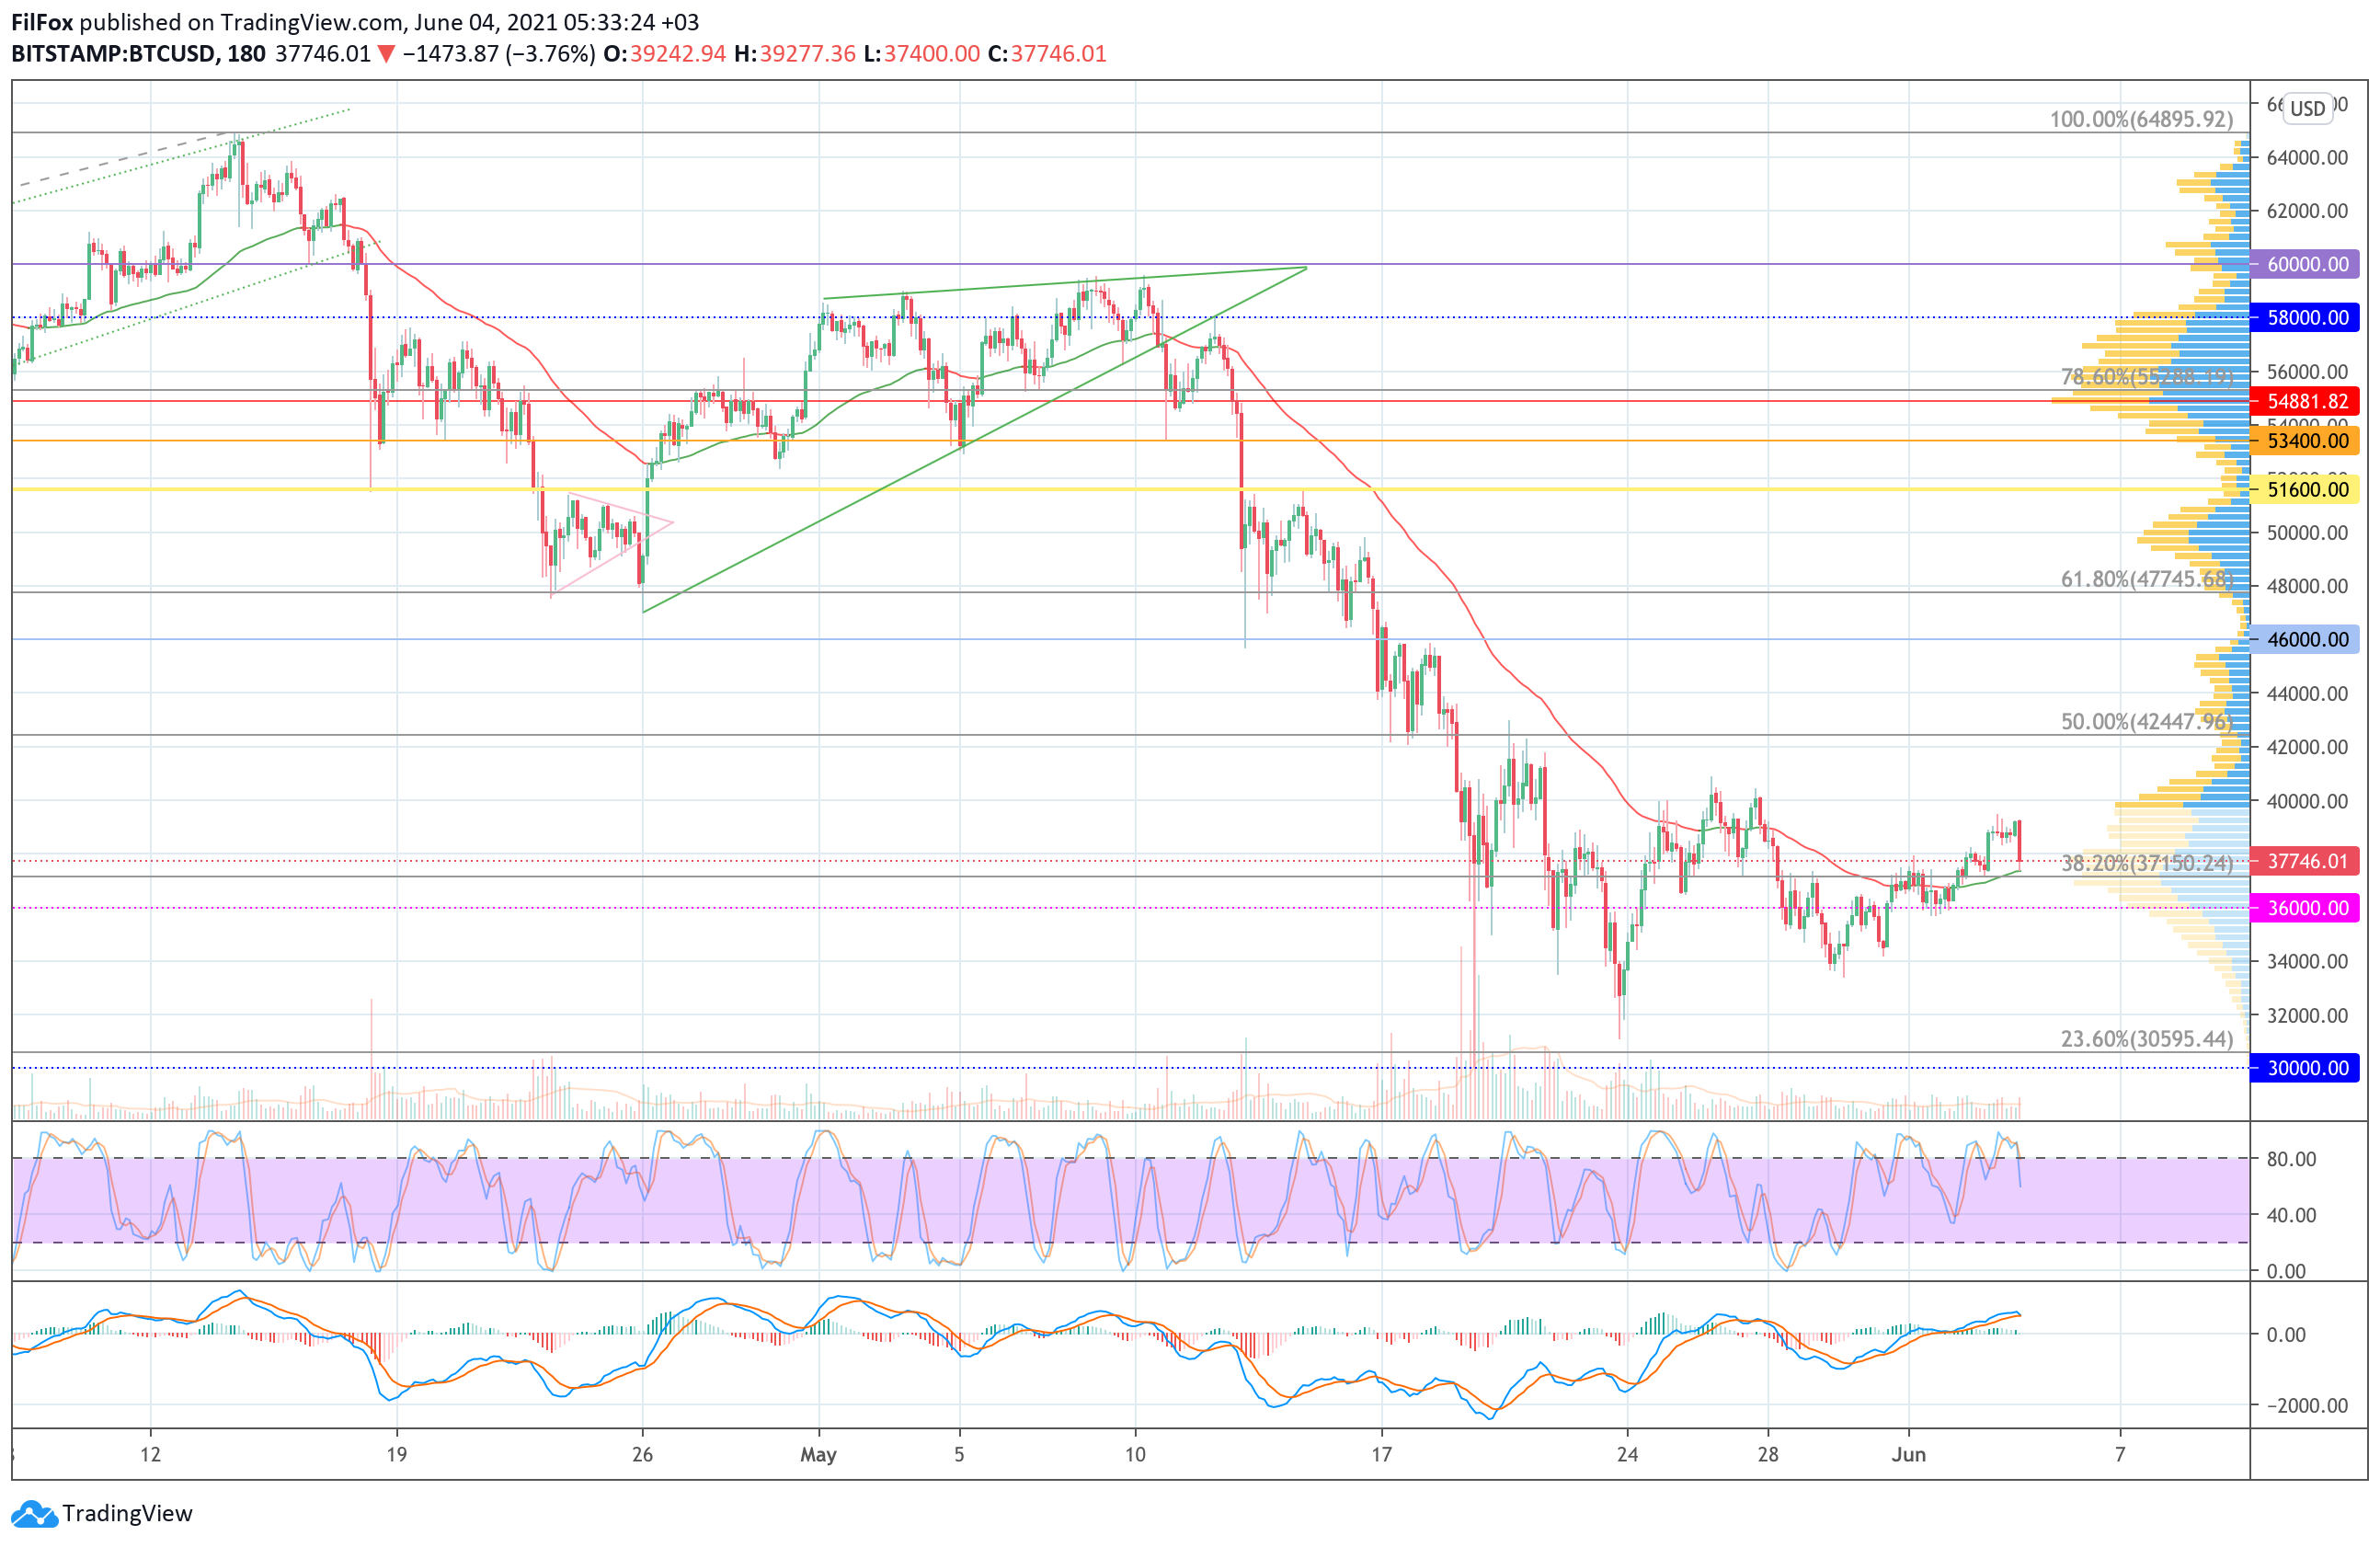 Analysis of the prices of Bitcoin, Ethereum, XRP for 06/04/2021